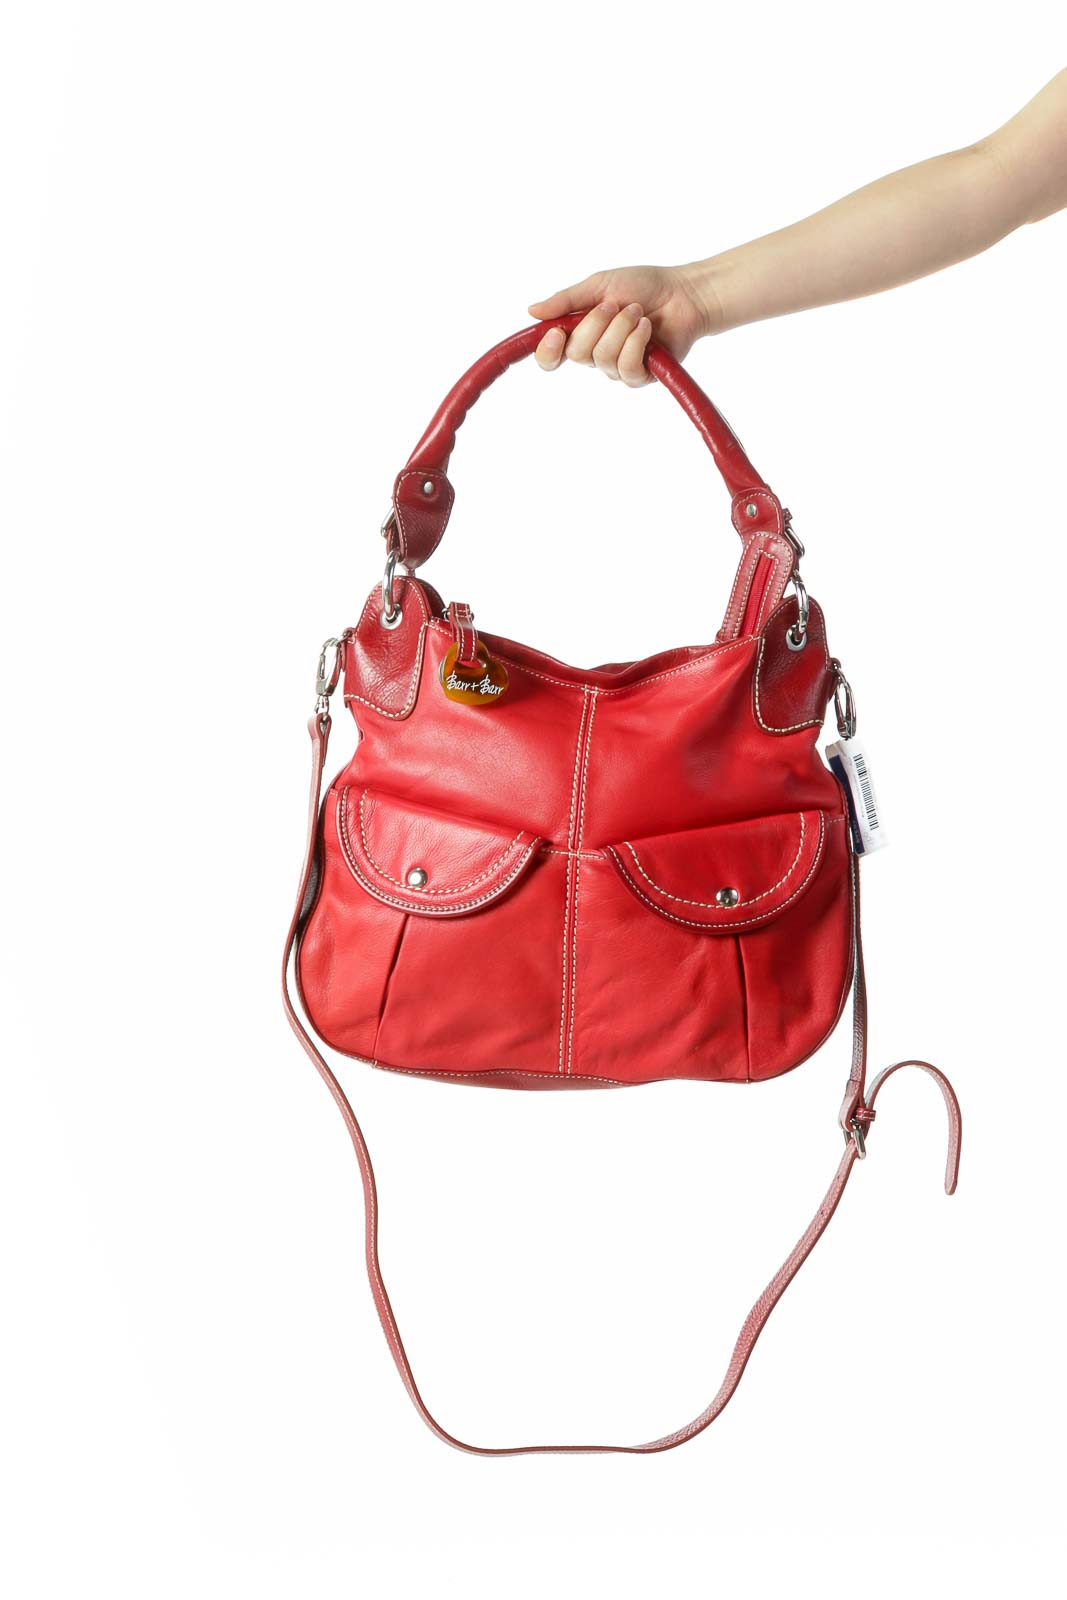 Red Stiched Heavy Leather Shoulder Bag with Crossbody Strap Front